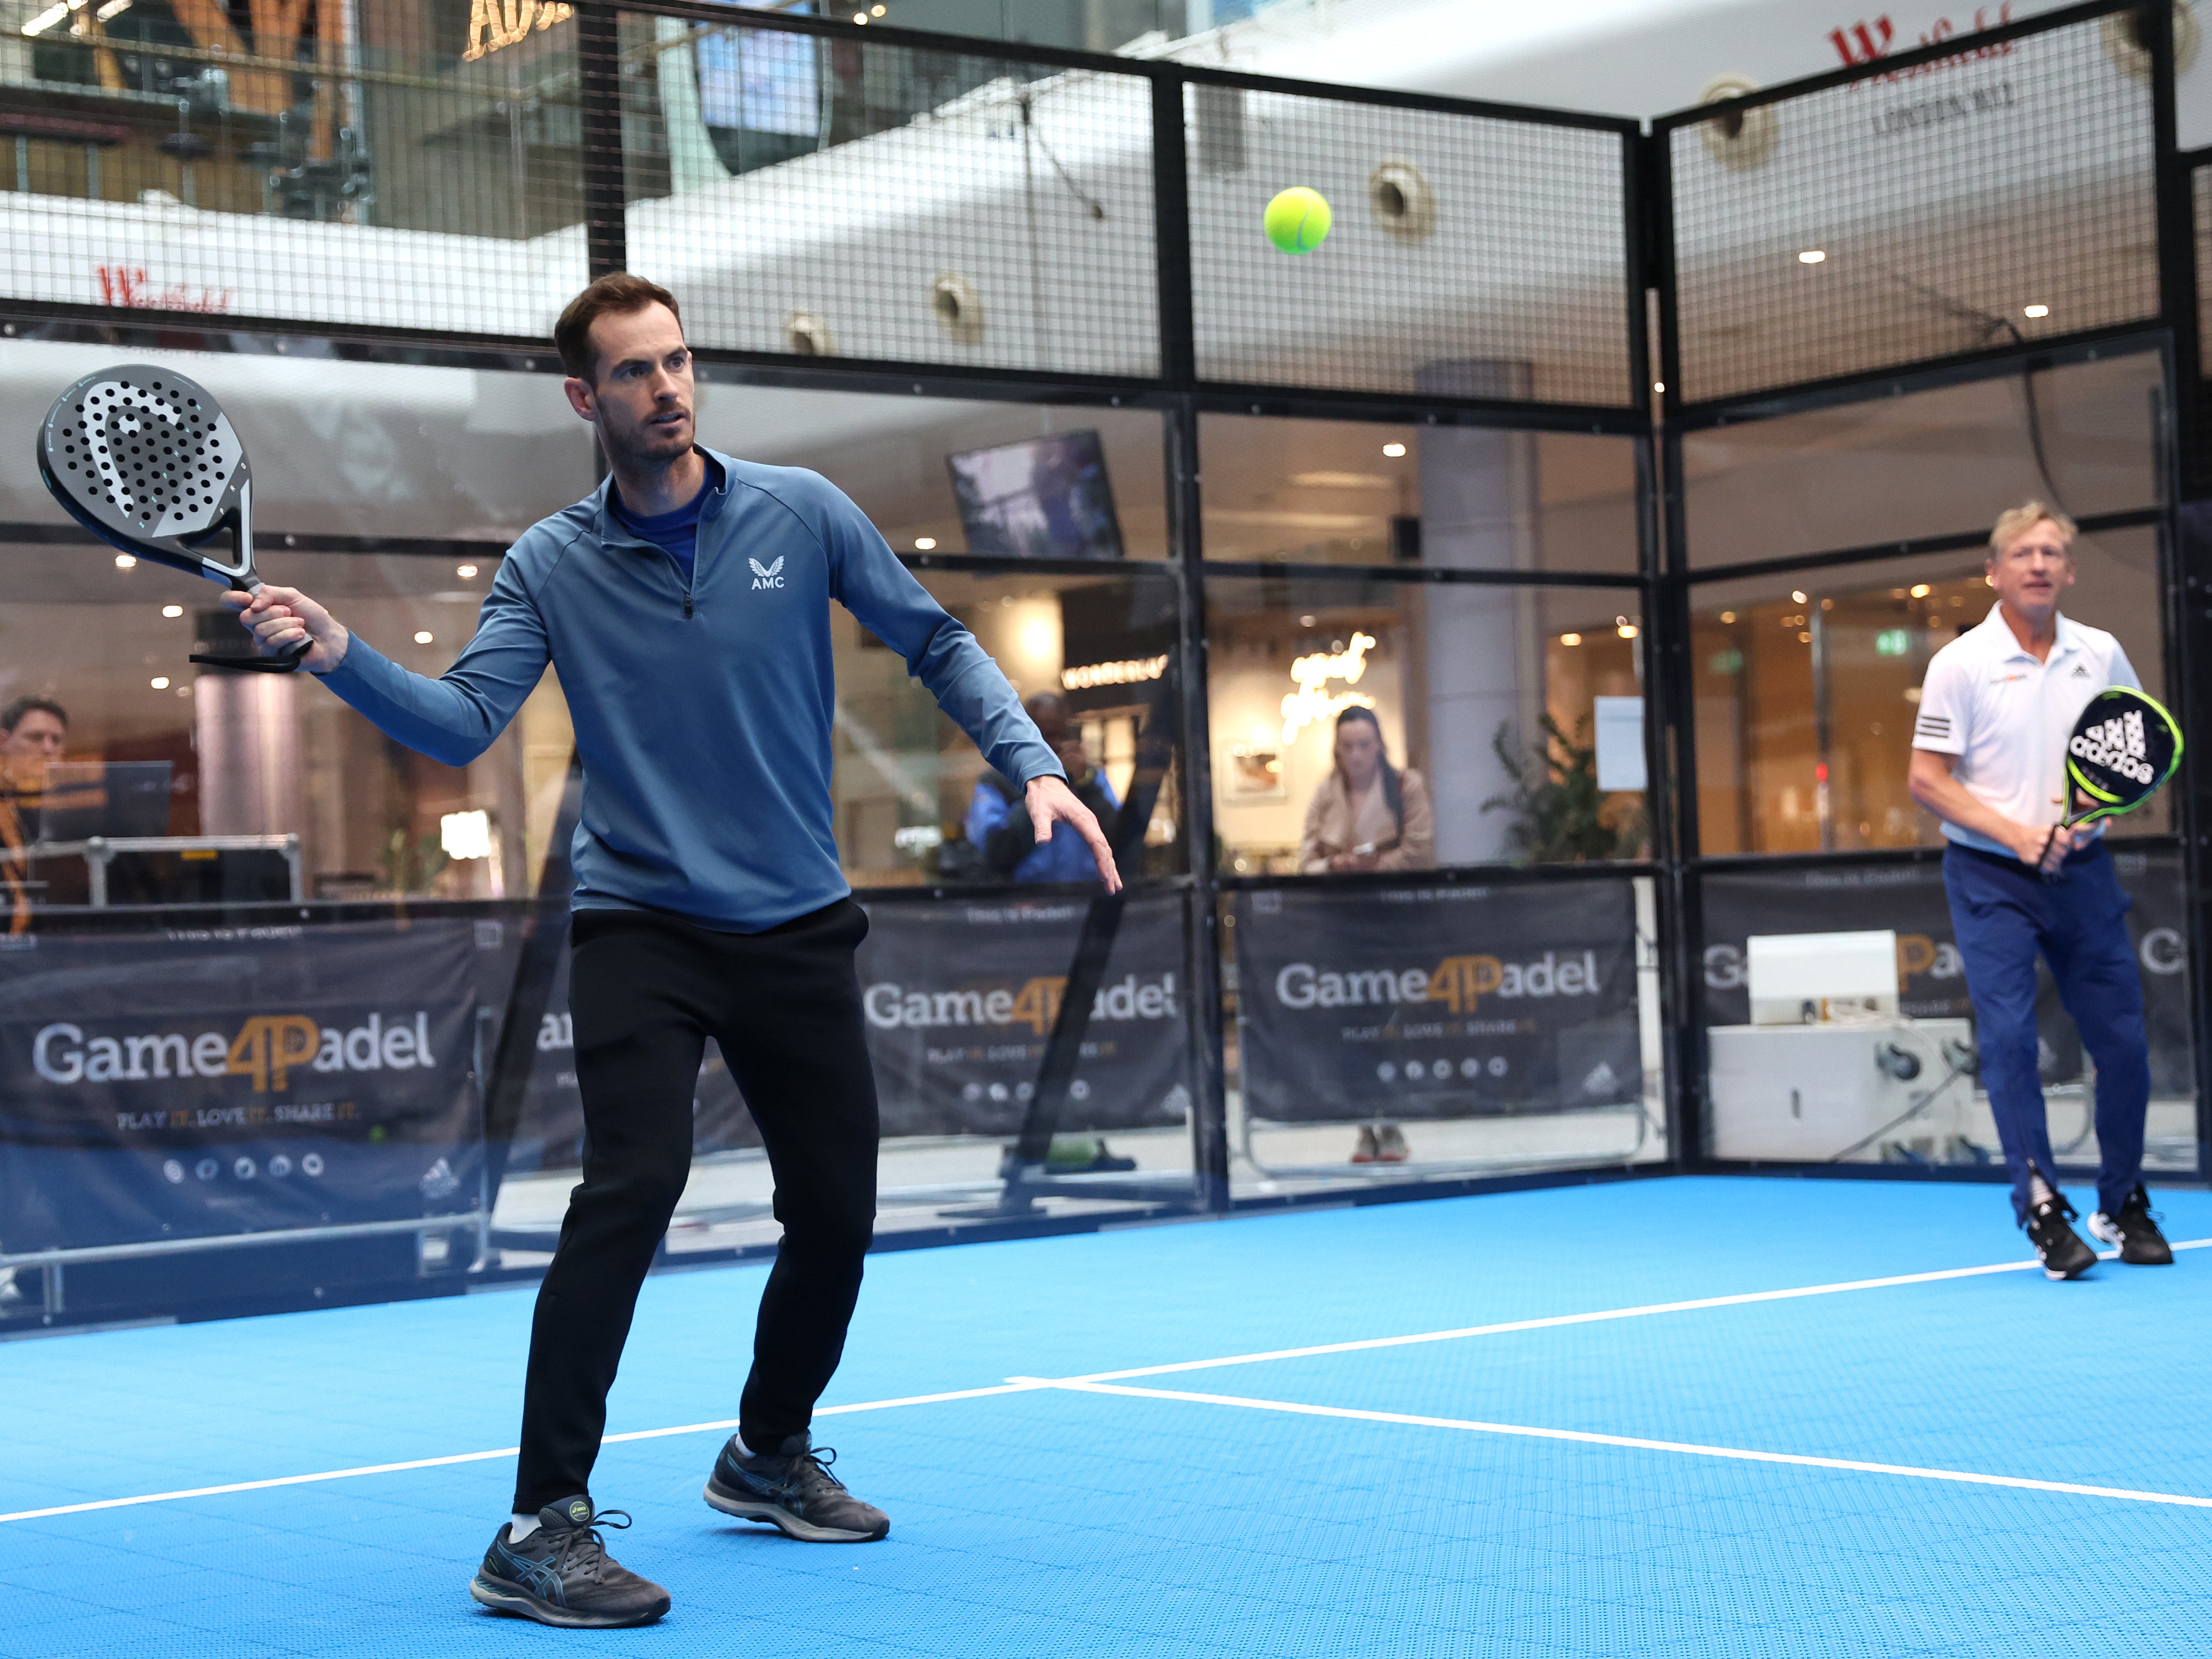 Padel has attracted backing and investment from professional athletes including Andy Murray